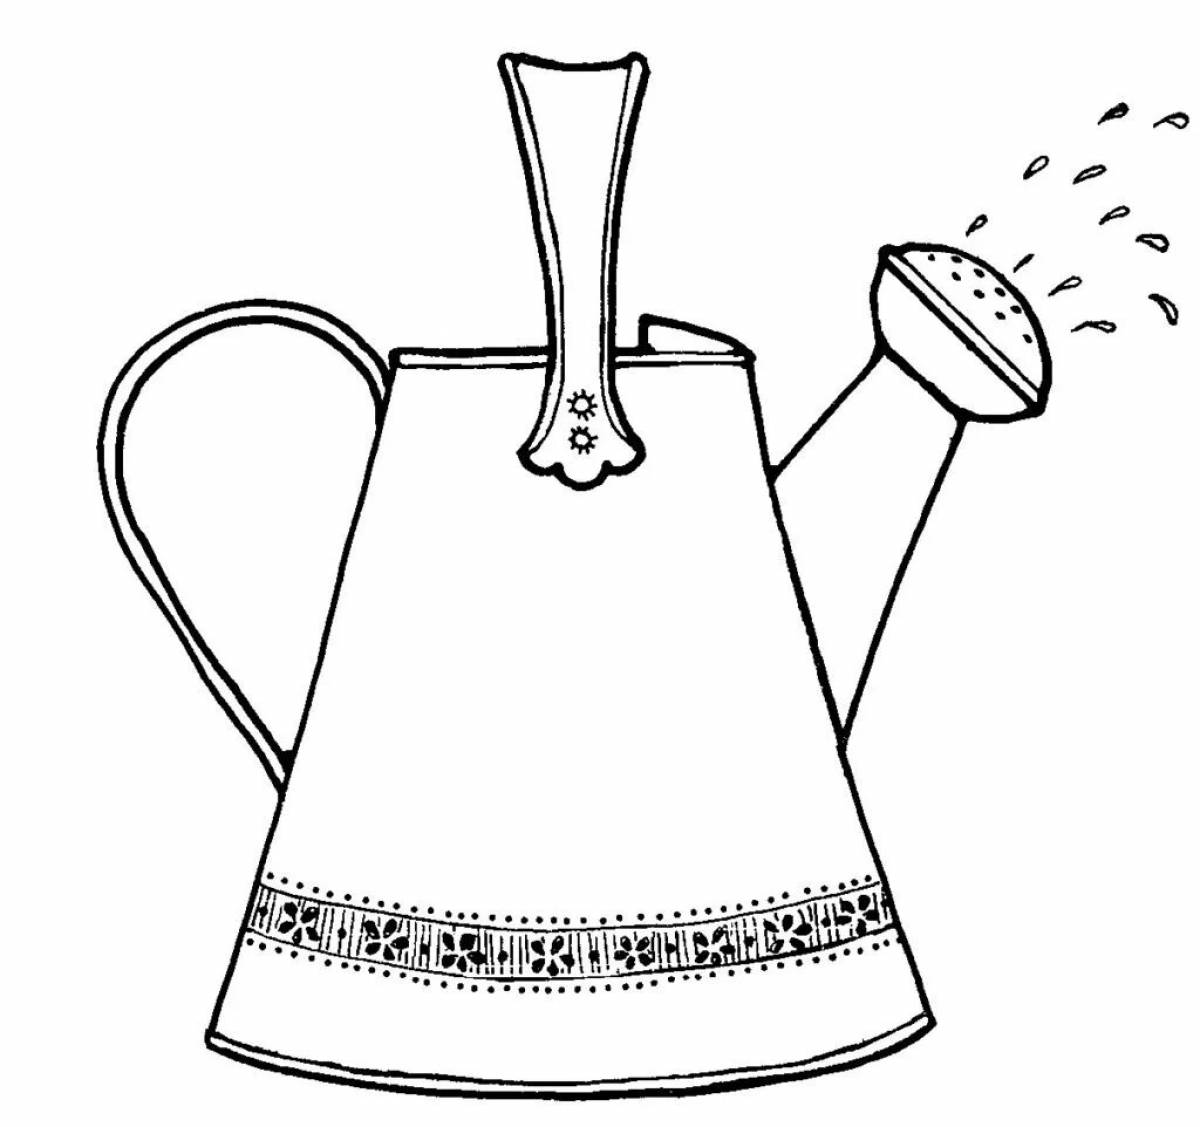 Great watering can coloring book for kids